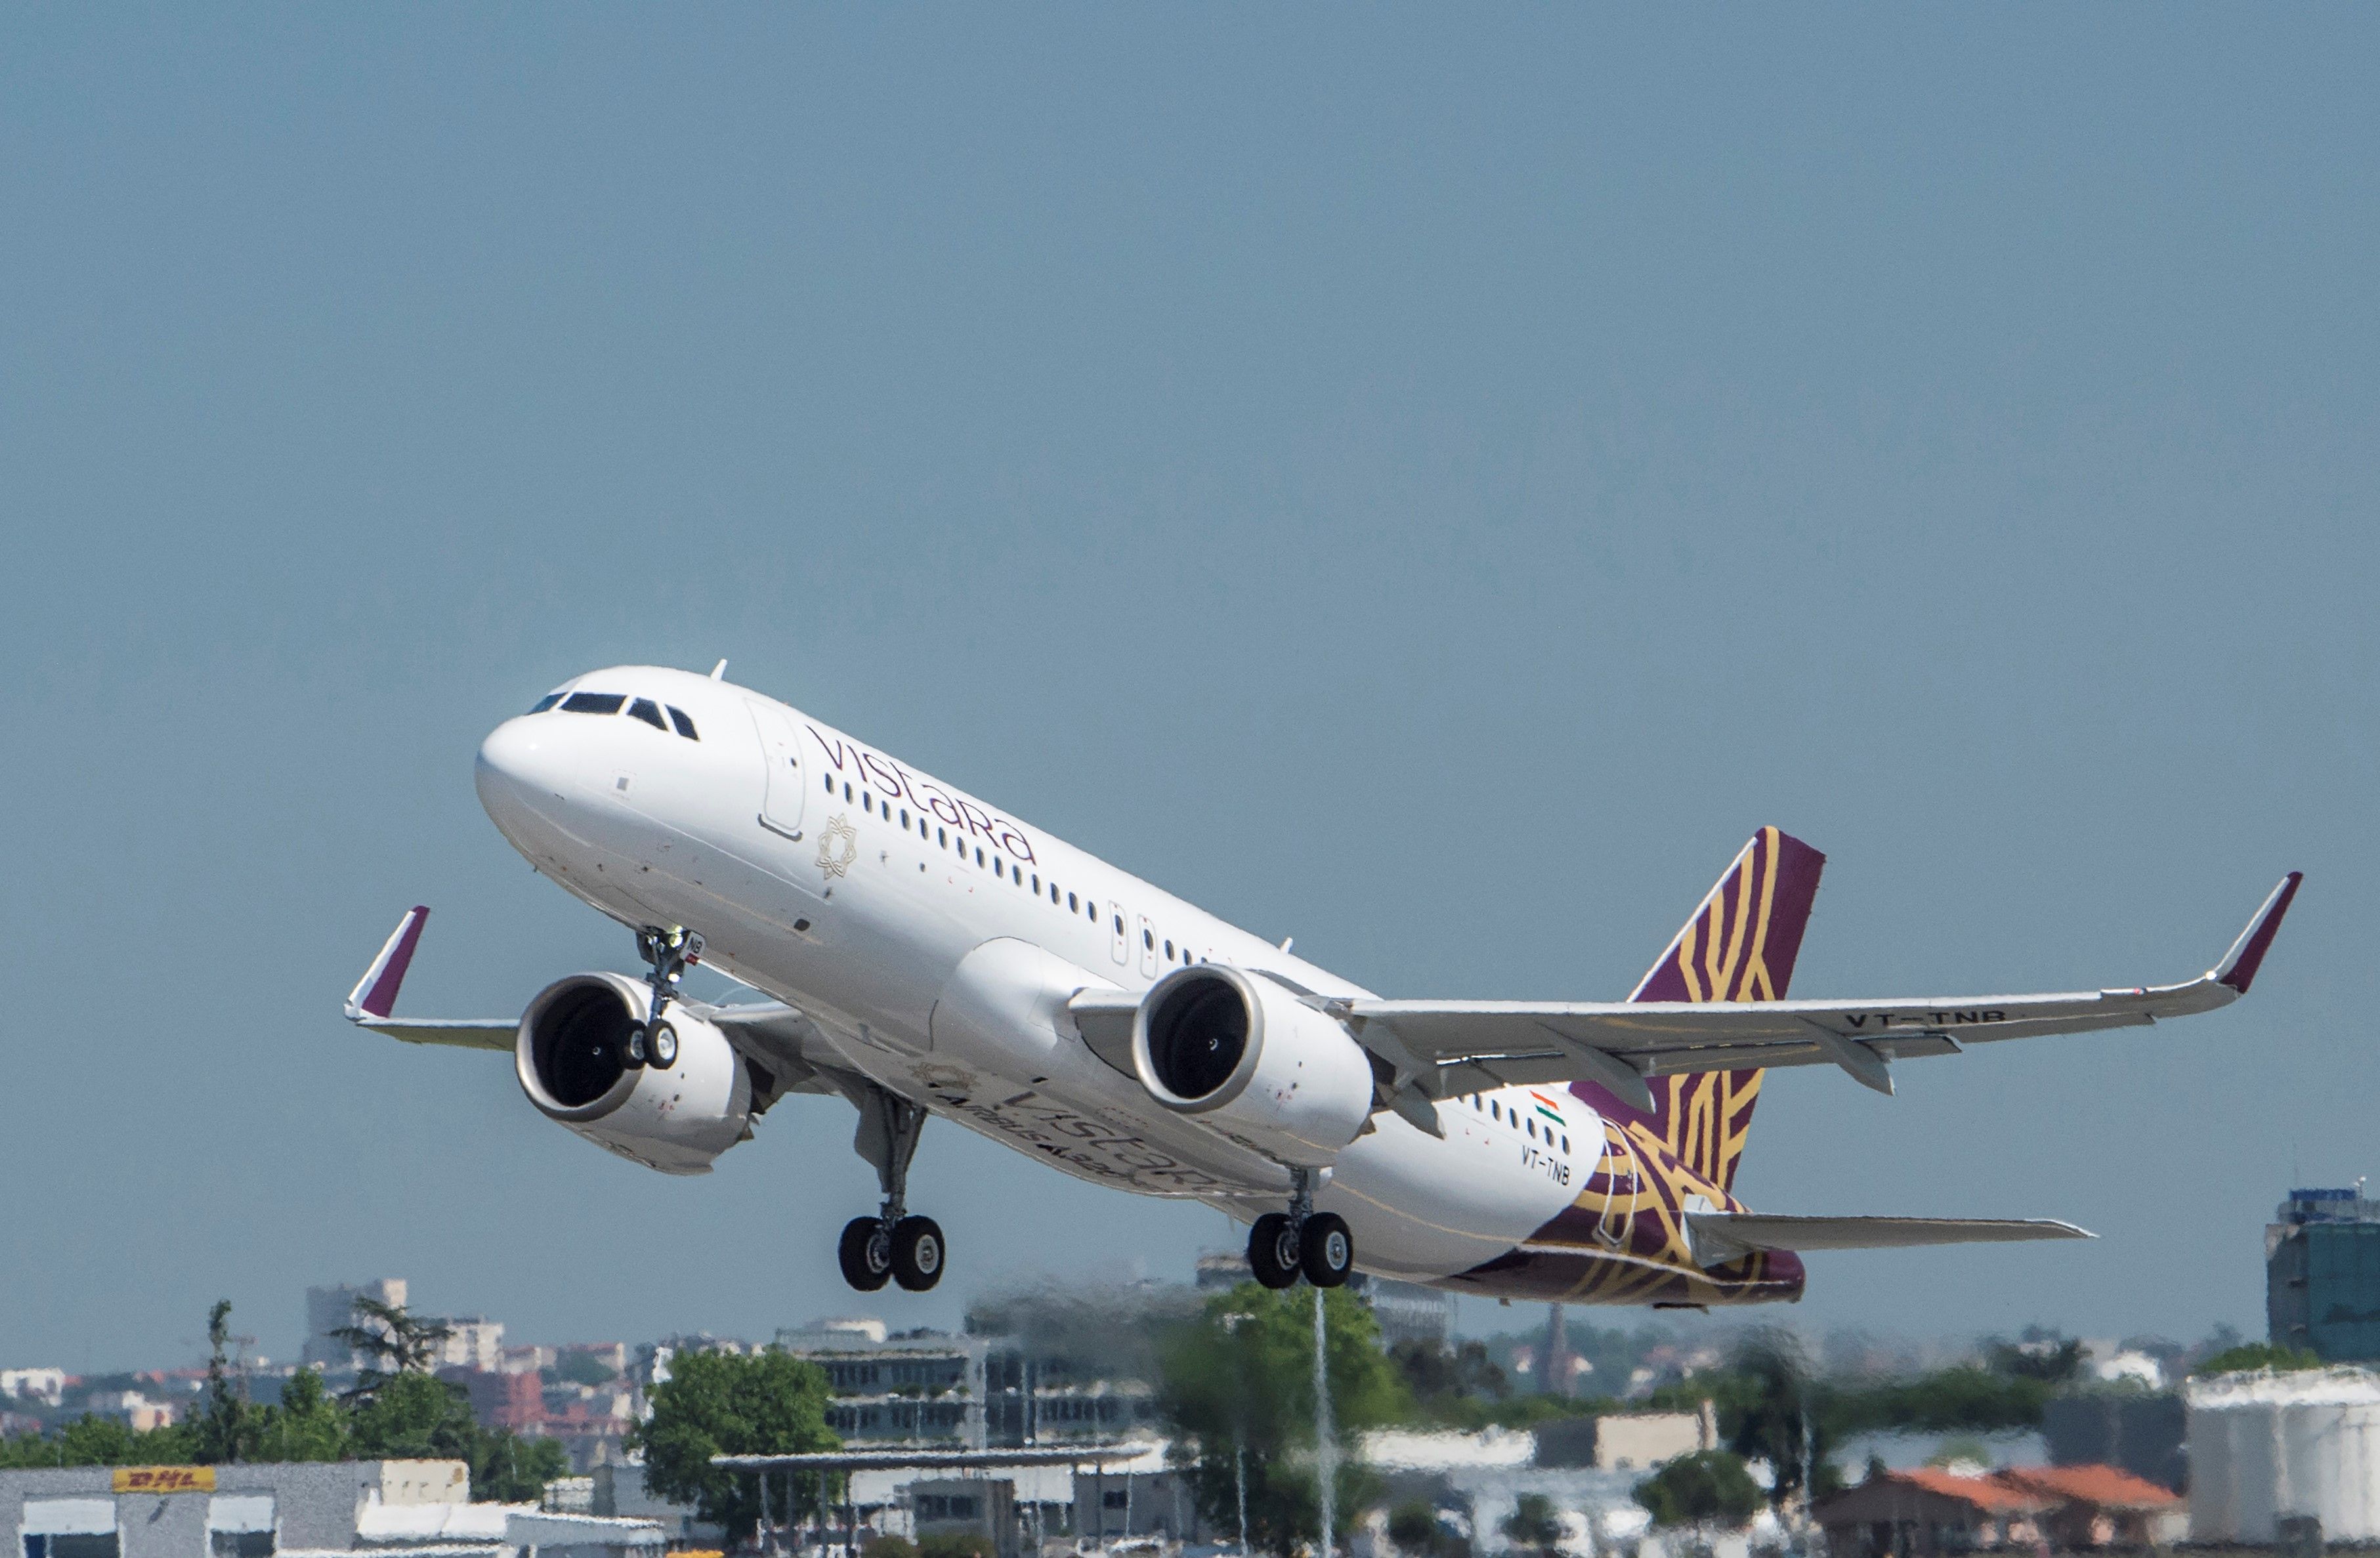 Vistara Airbus A320neo seen taking off from Airbus facility.